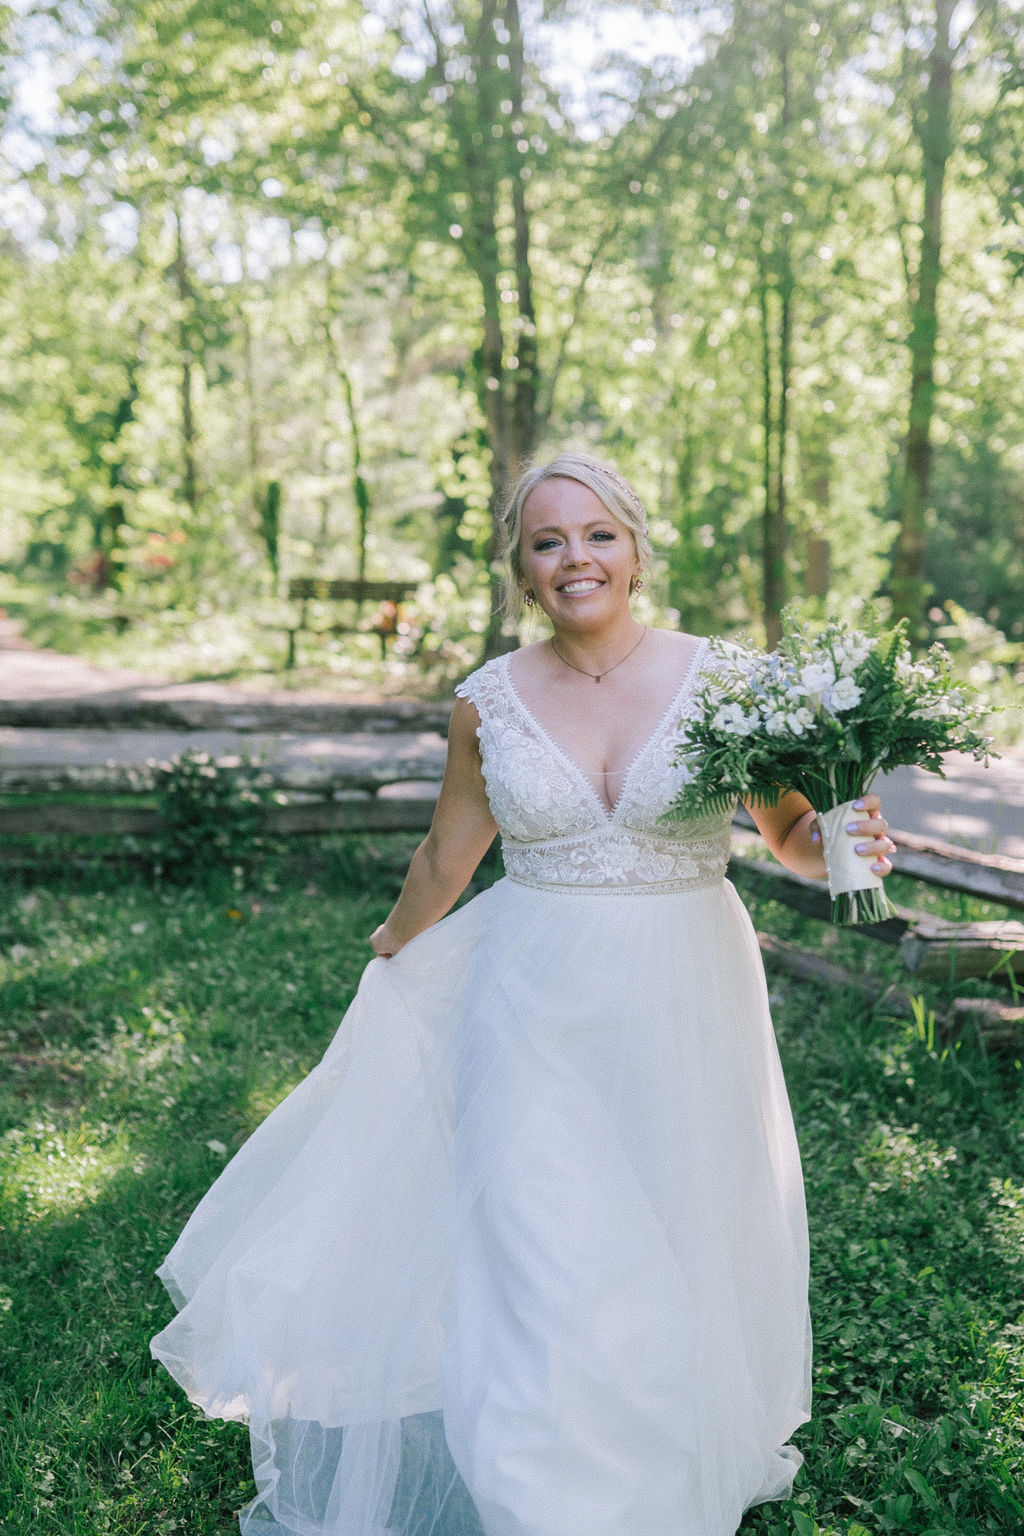 southern bride in a Vowed dress with lace detail on the bodice and a flowy skirt. Bride is in the Ijams, holding her bouquet and walking toward the camera while holding her dress